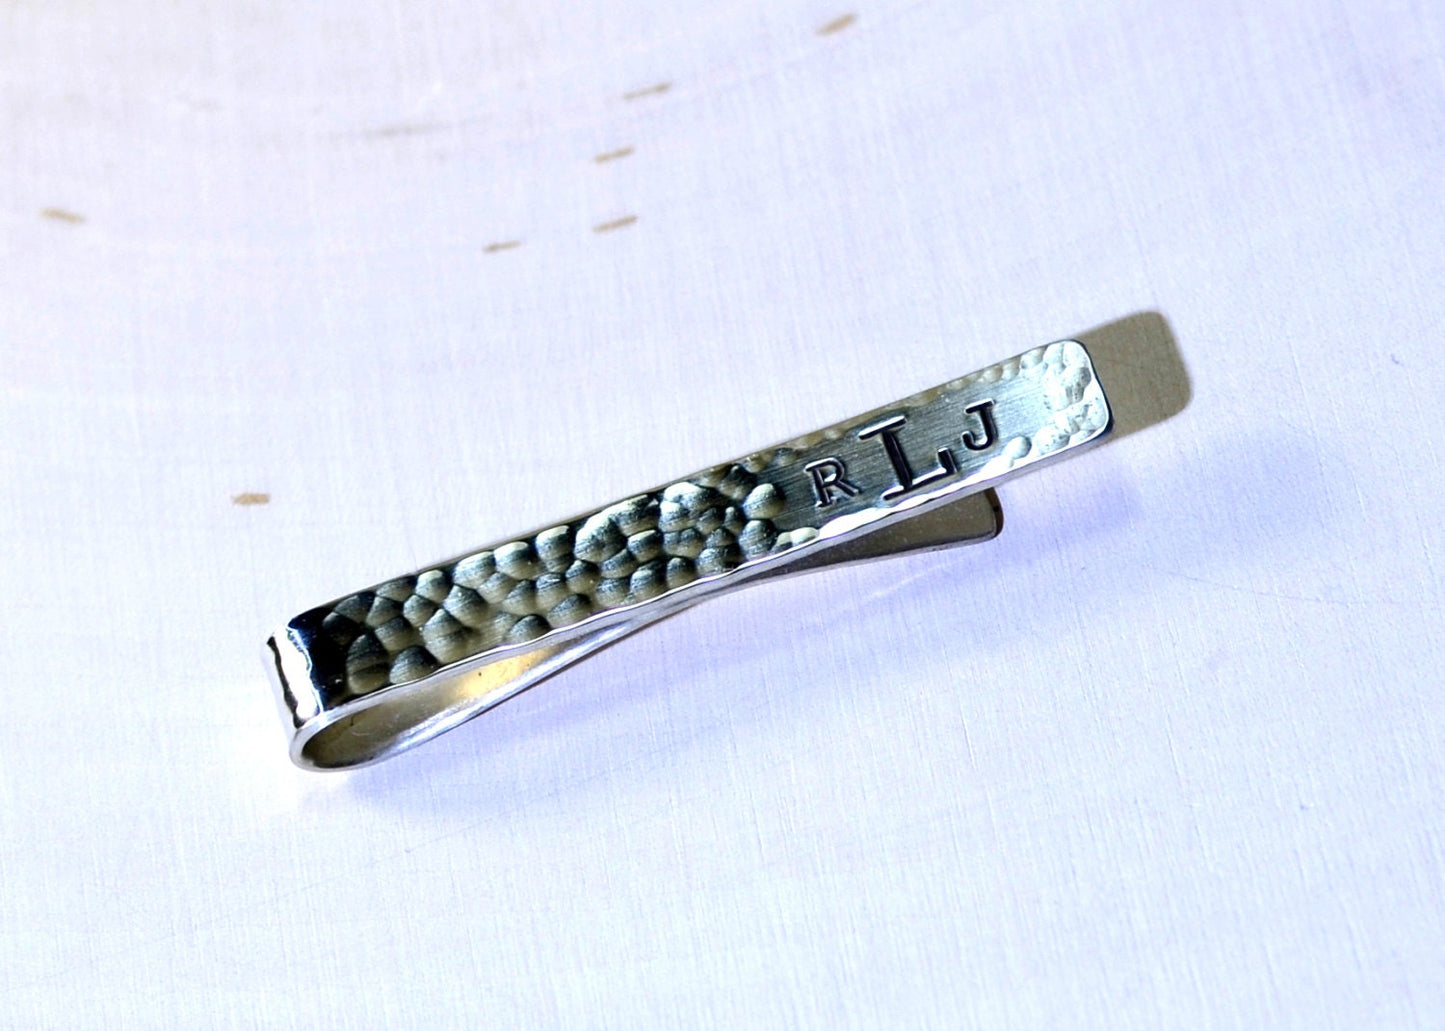 Hammered sterling silver tie clip with personalized monogram on tie bar